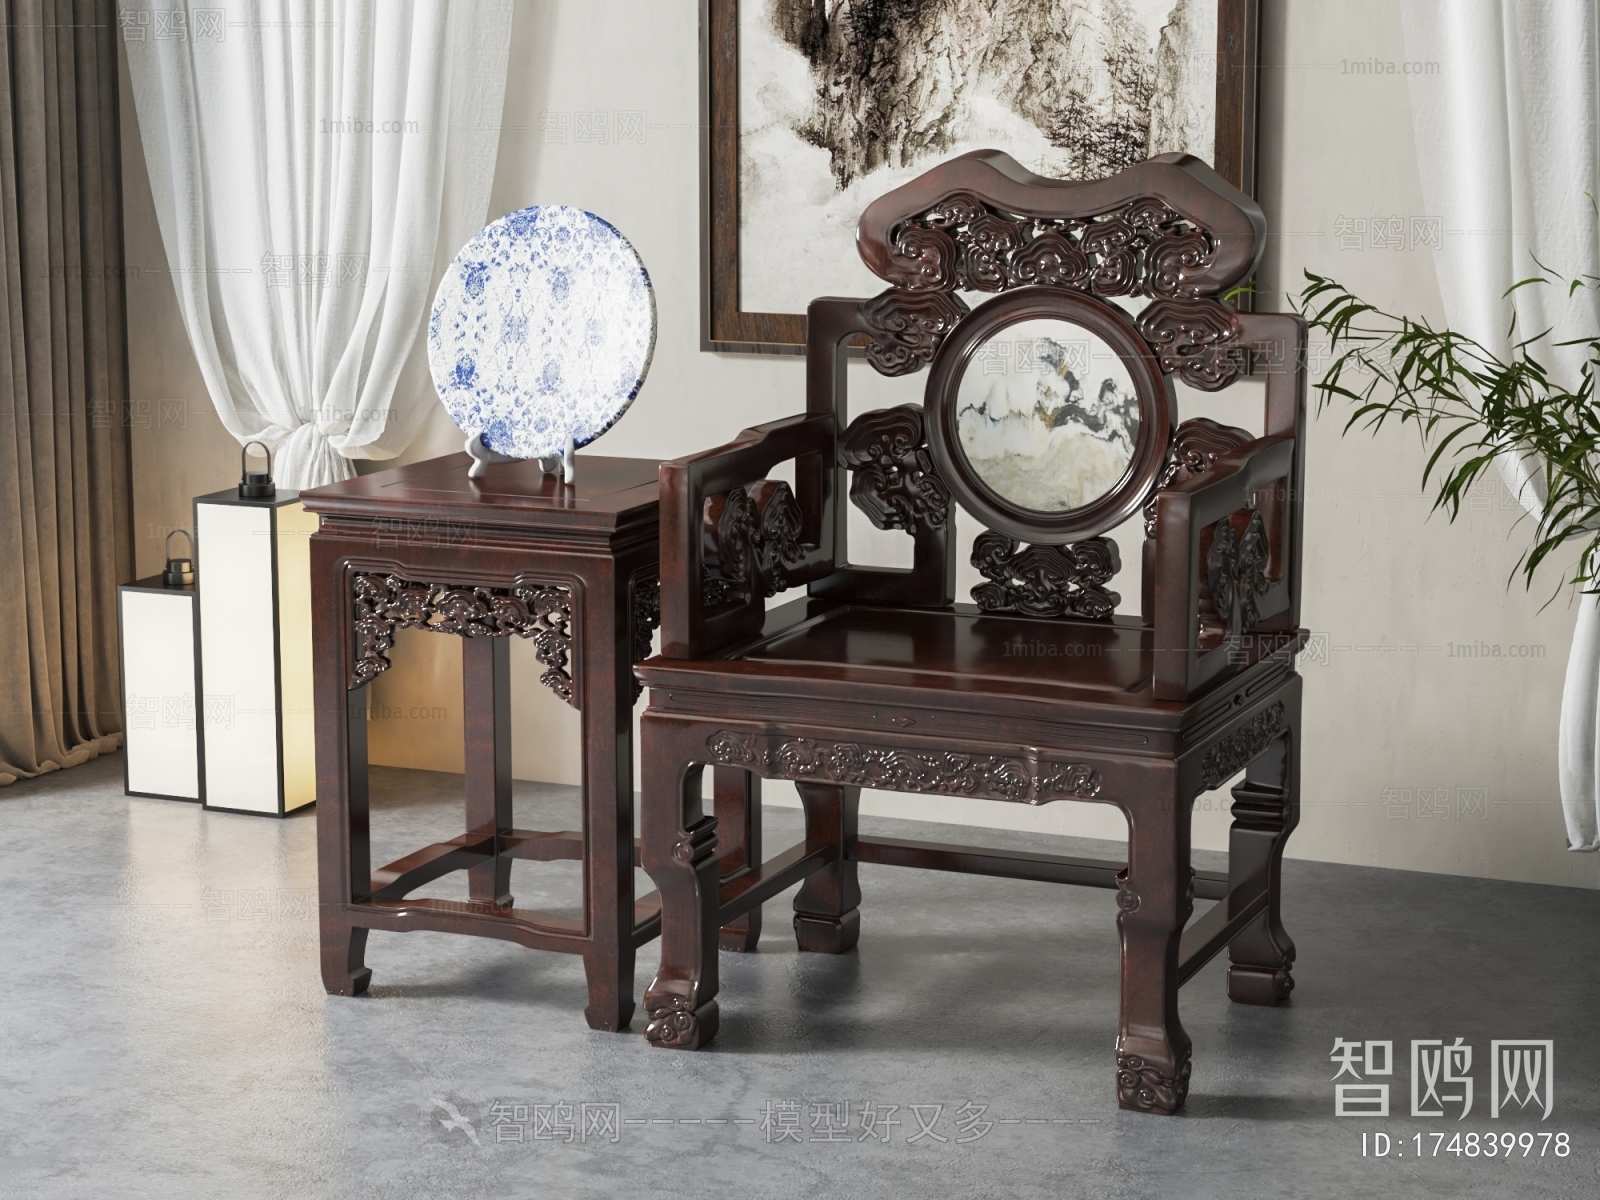 Chinese Style Lounge Chair